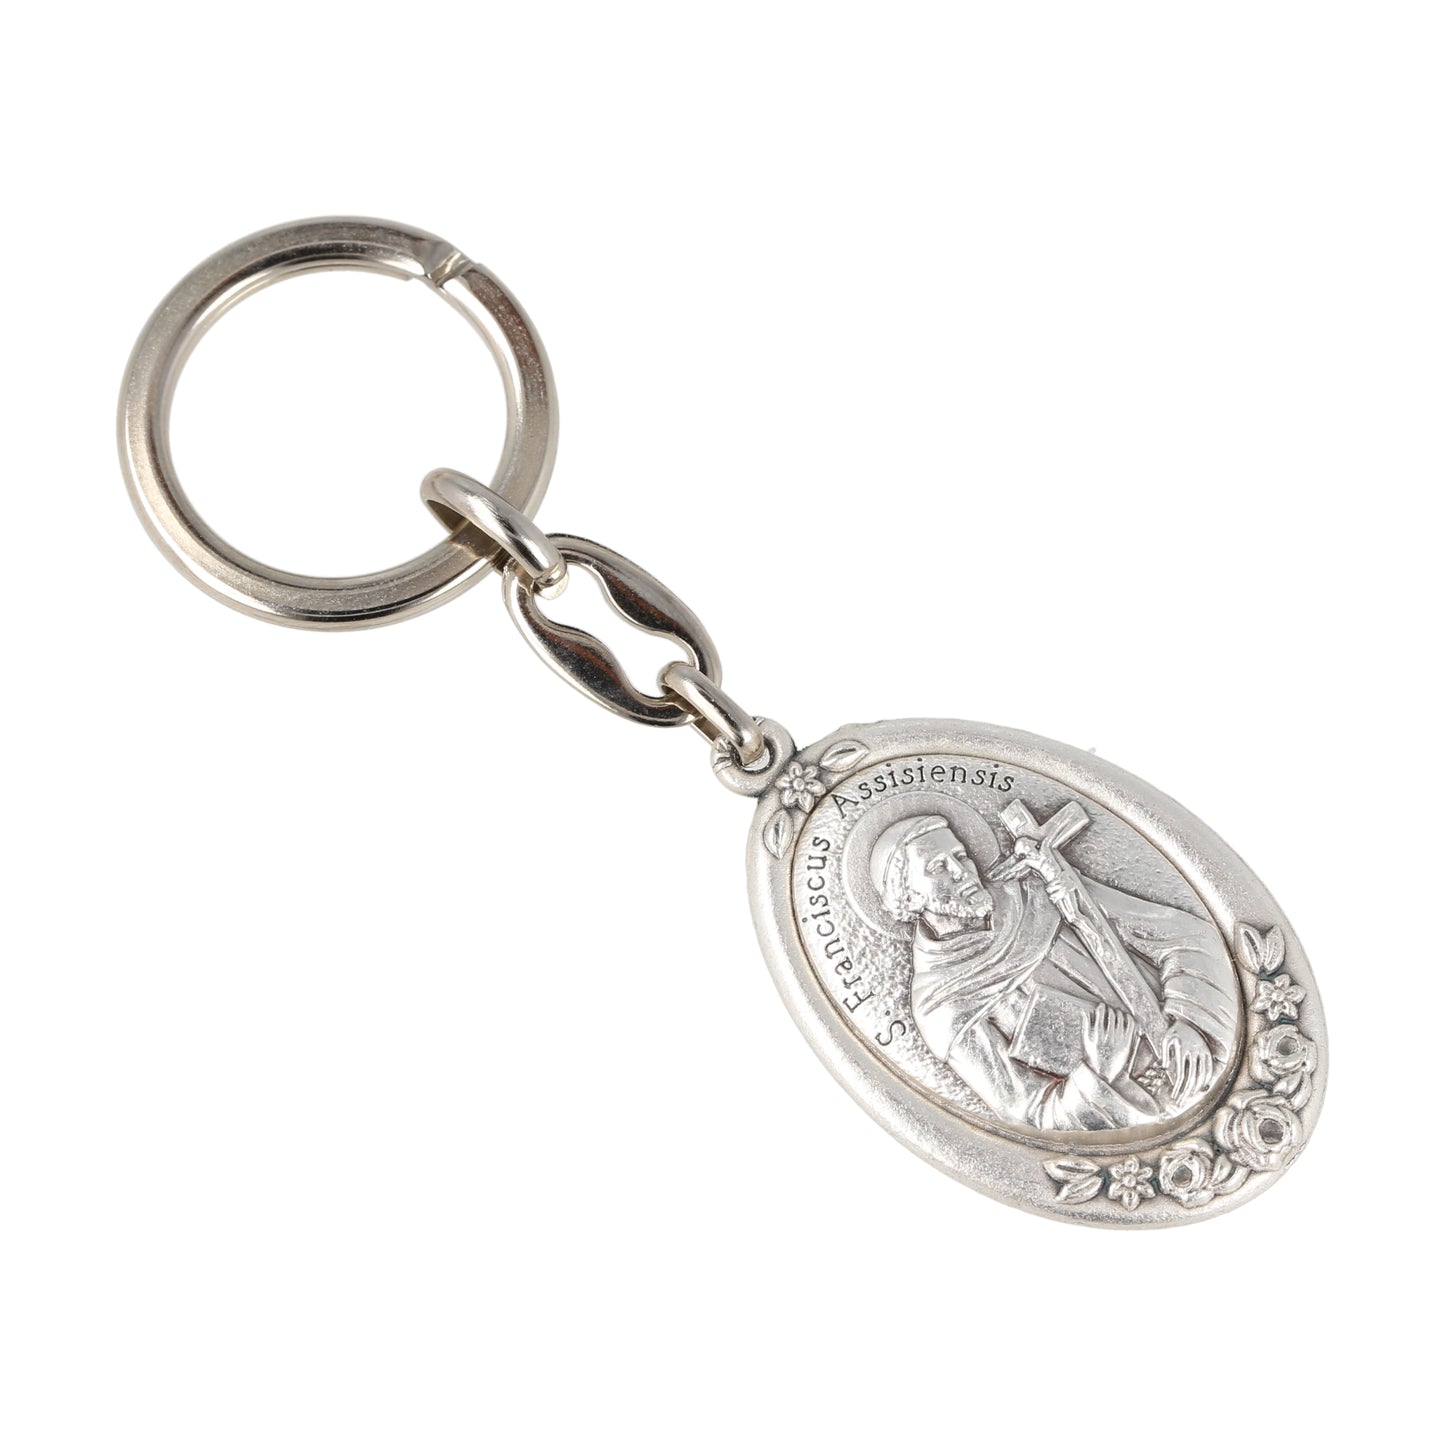 Keychain San Francisco Oval Silver With Flowers.  Souvenirs from Italy